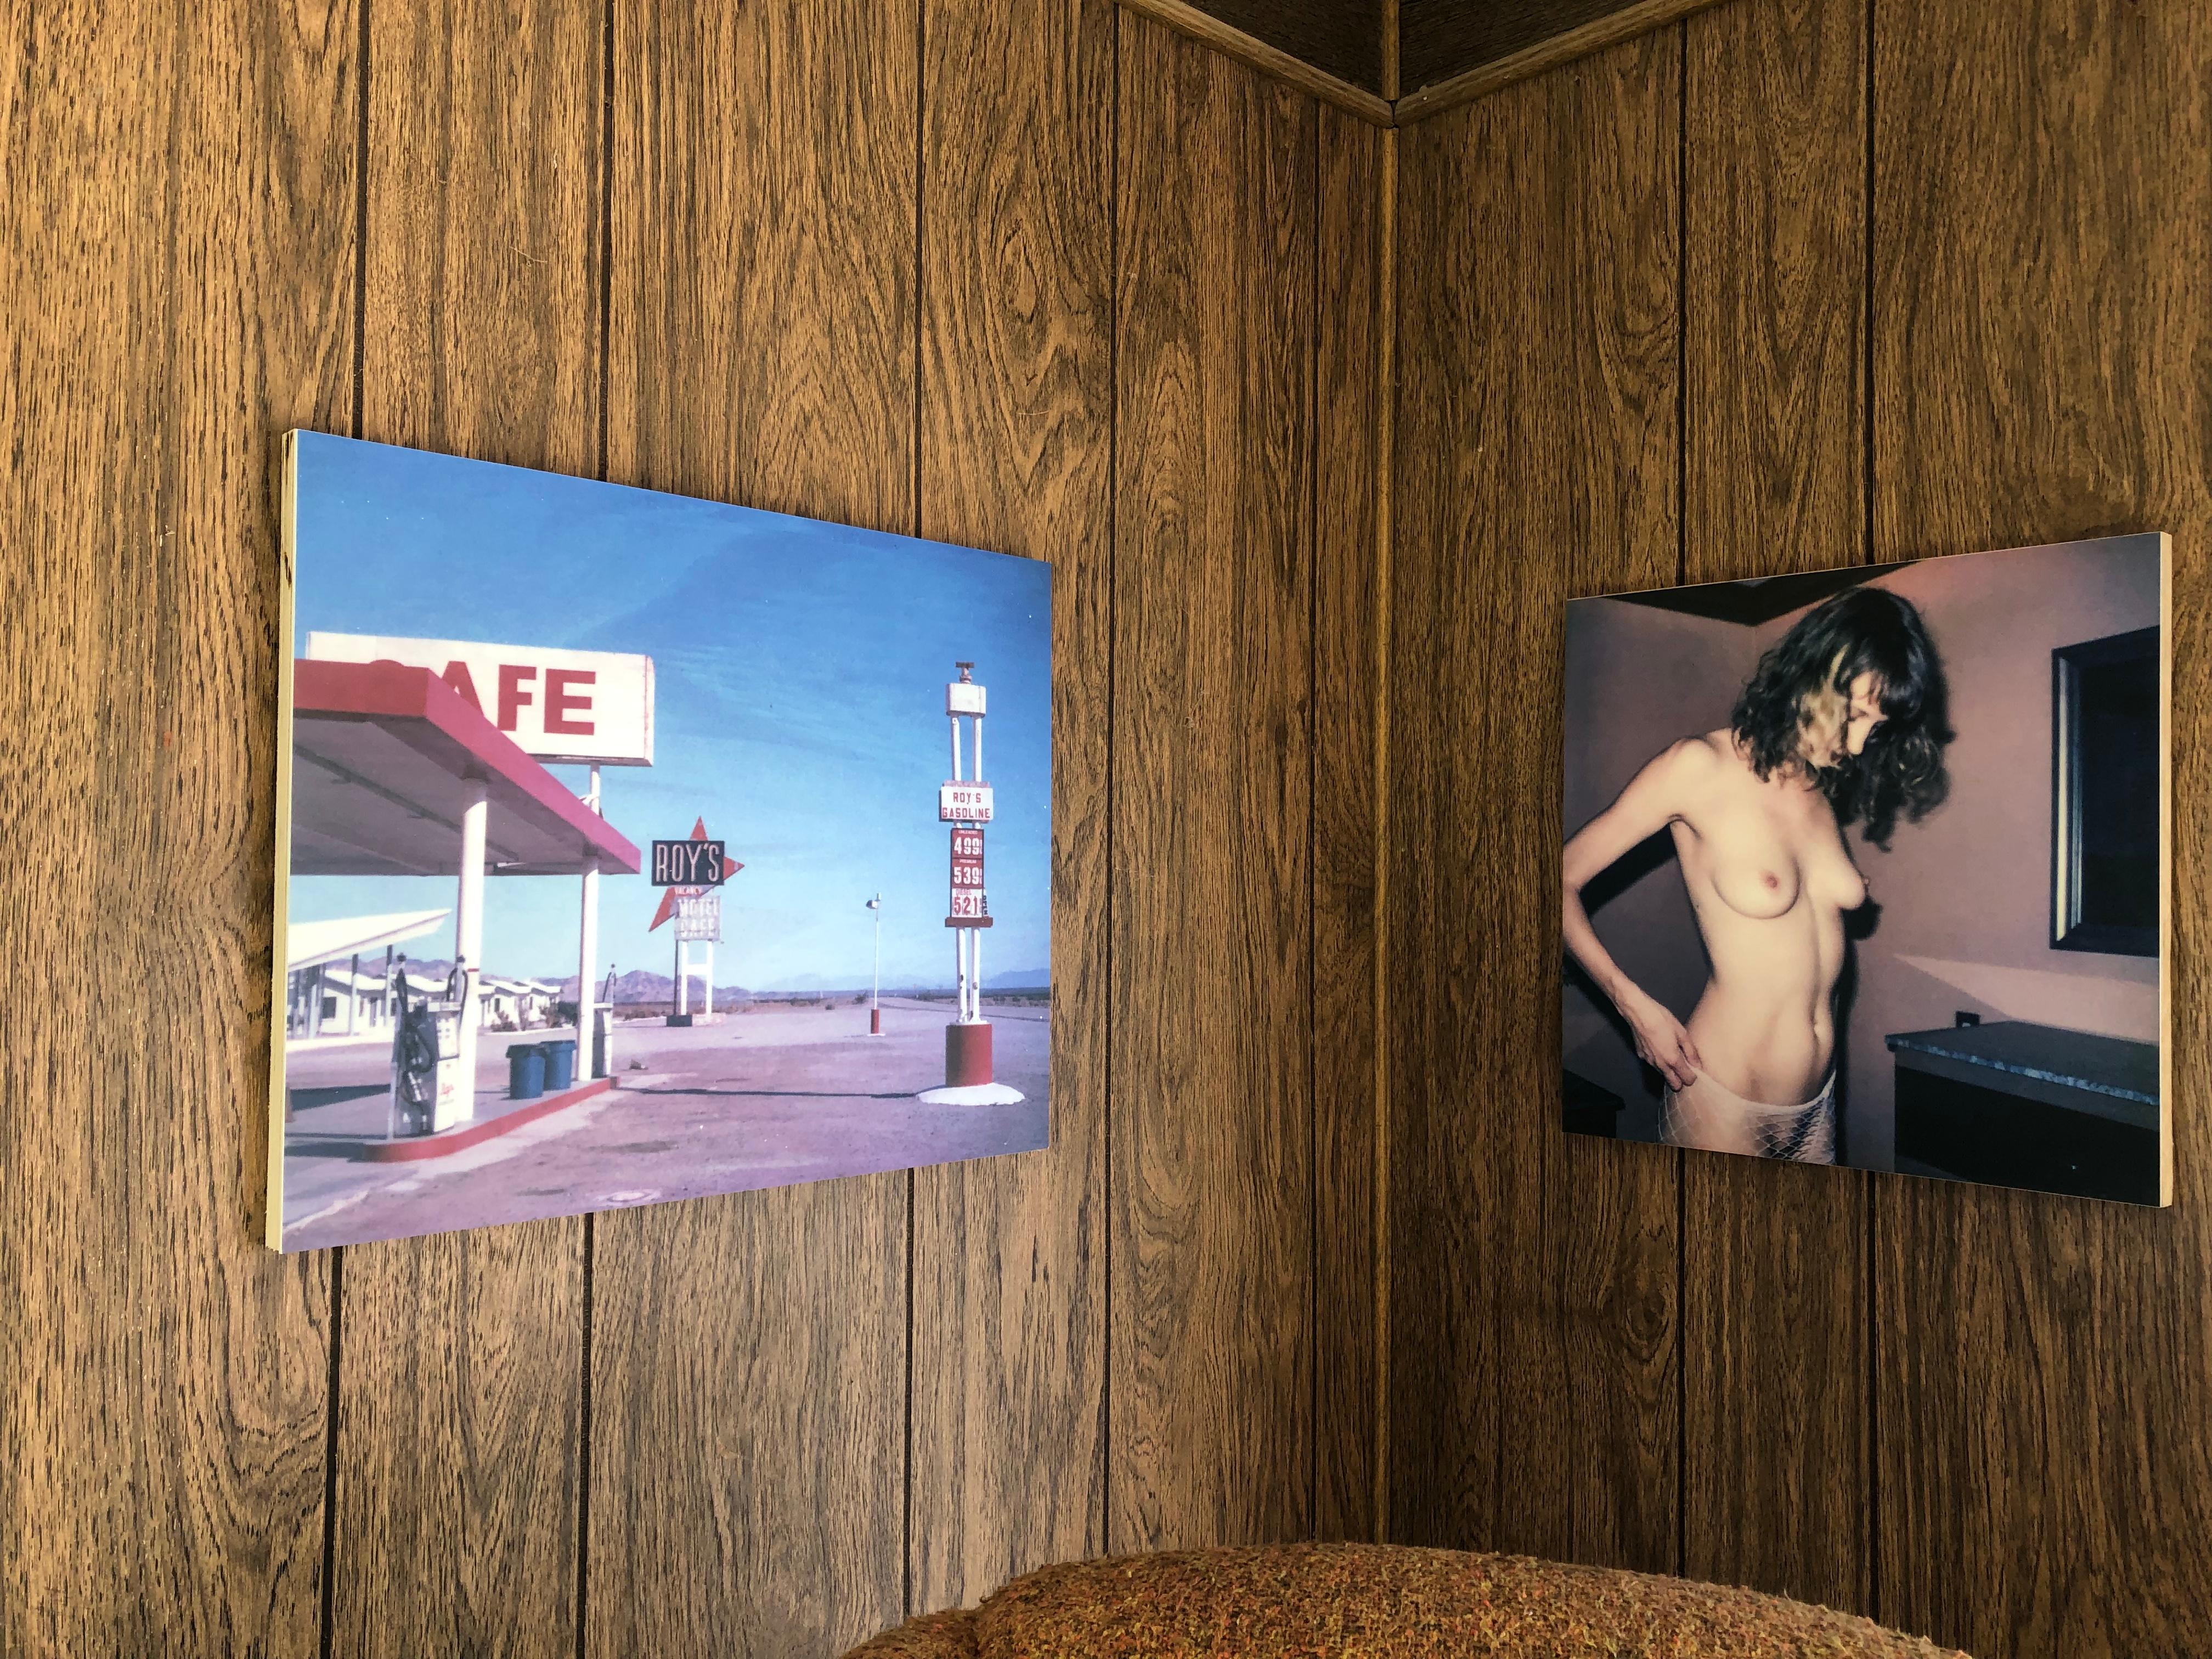 Roys (Amboy), 2018, 45x61cm, Edition 1/7 plus 2 Artist Proofs, based on an original Polaroid, Digital C-print, not mounted. Signed on the back and with certificate. Artist Inventory Number PL2018-450.

This piece is exhibited at the Bombay Beach